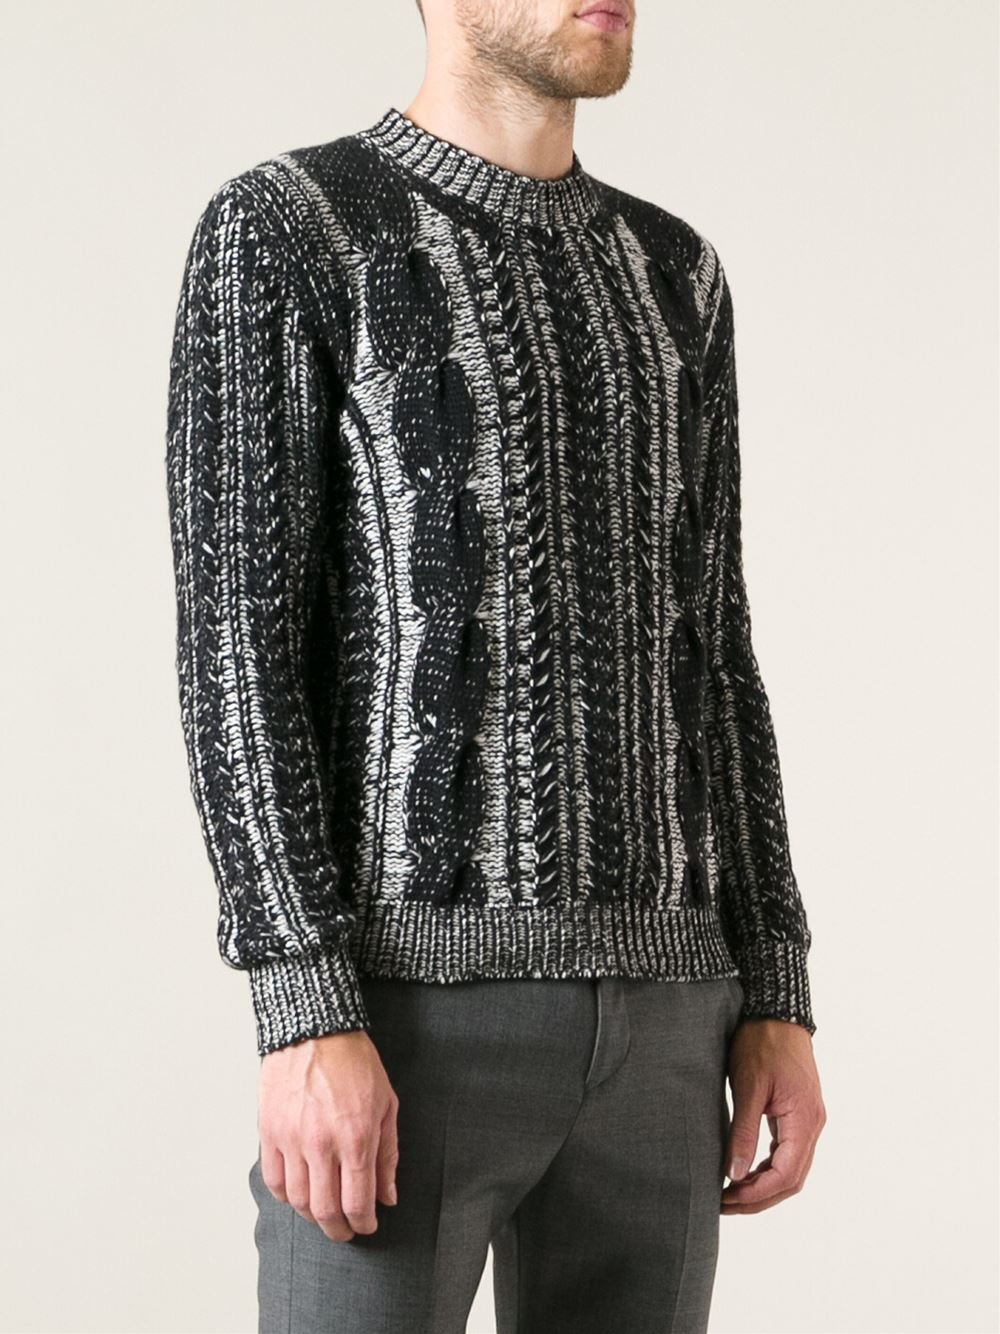 Lyst - Dior homme Cable Knit Sweater in Gray for Men